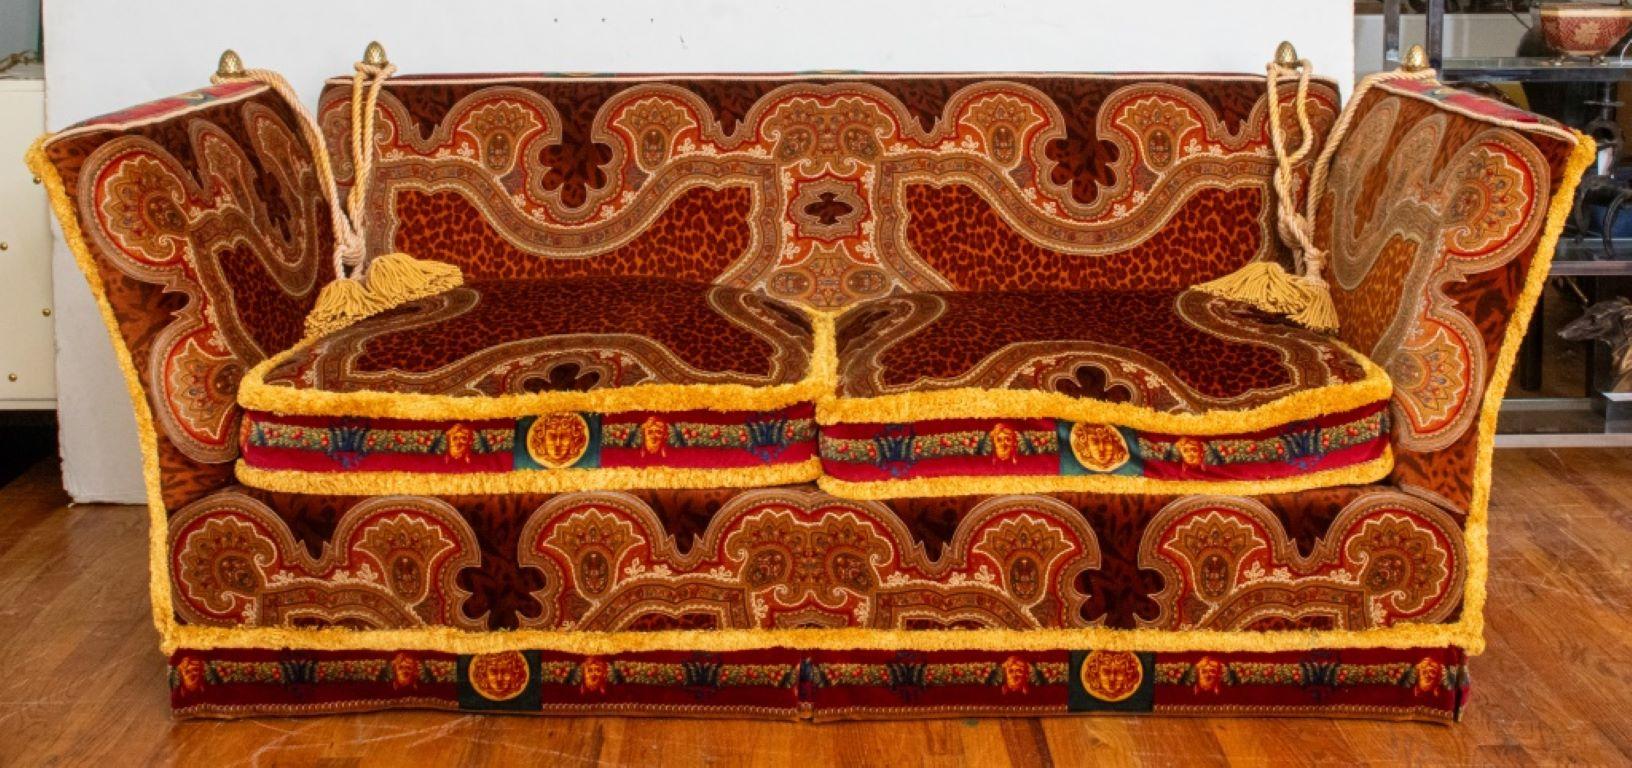 Gianni Versace (Italian, 1946-1997) upholstered suite comprising a Knole sofa with two loose seat cushions, two Knole armchairs with loose seat cushions, two ottomans with removable fringed cushions, with two small fringed rectangular pillows, each